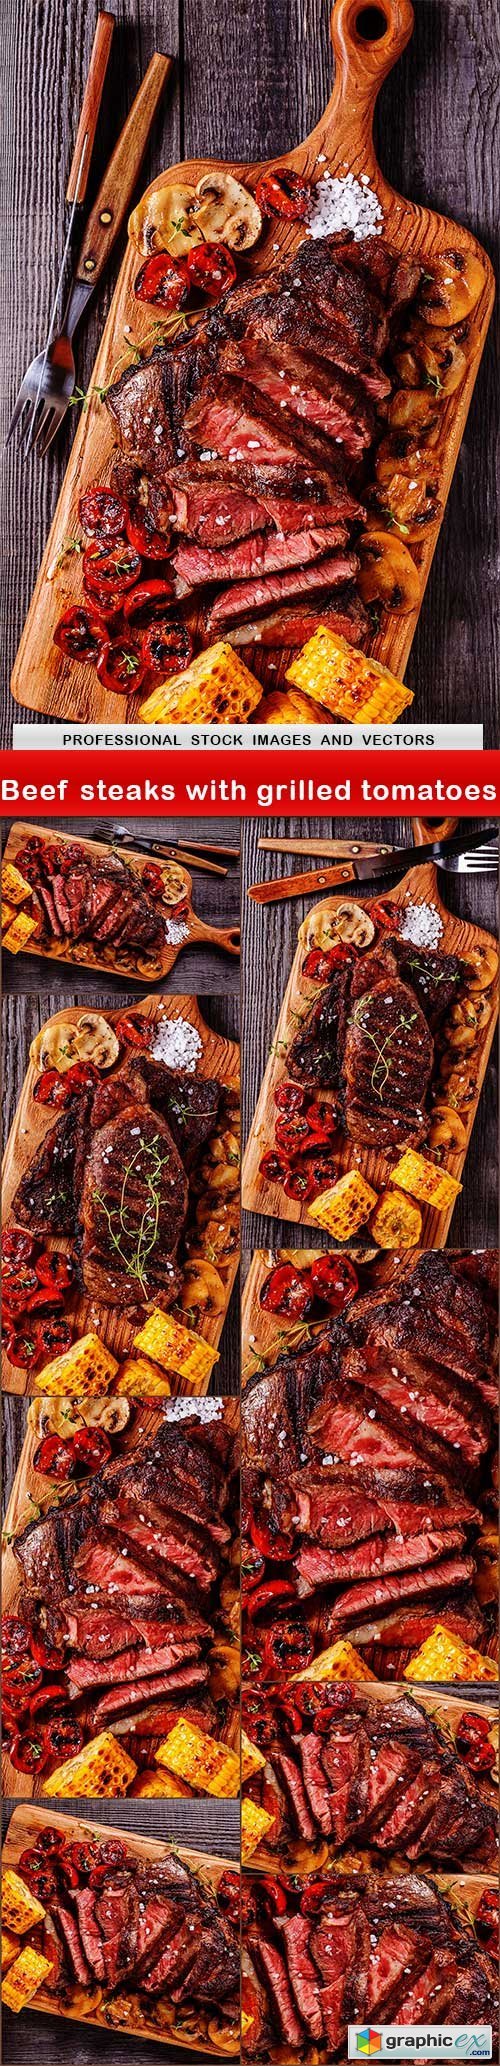 Beef steaks with grilled tomatoes - 9 UHQ JPEG